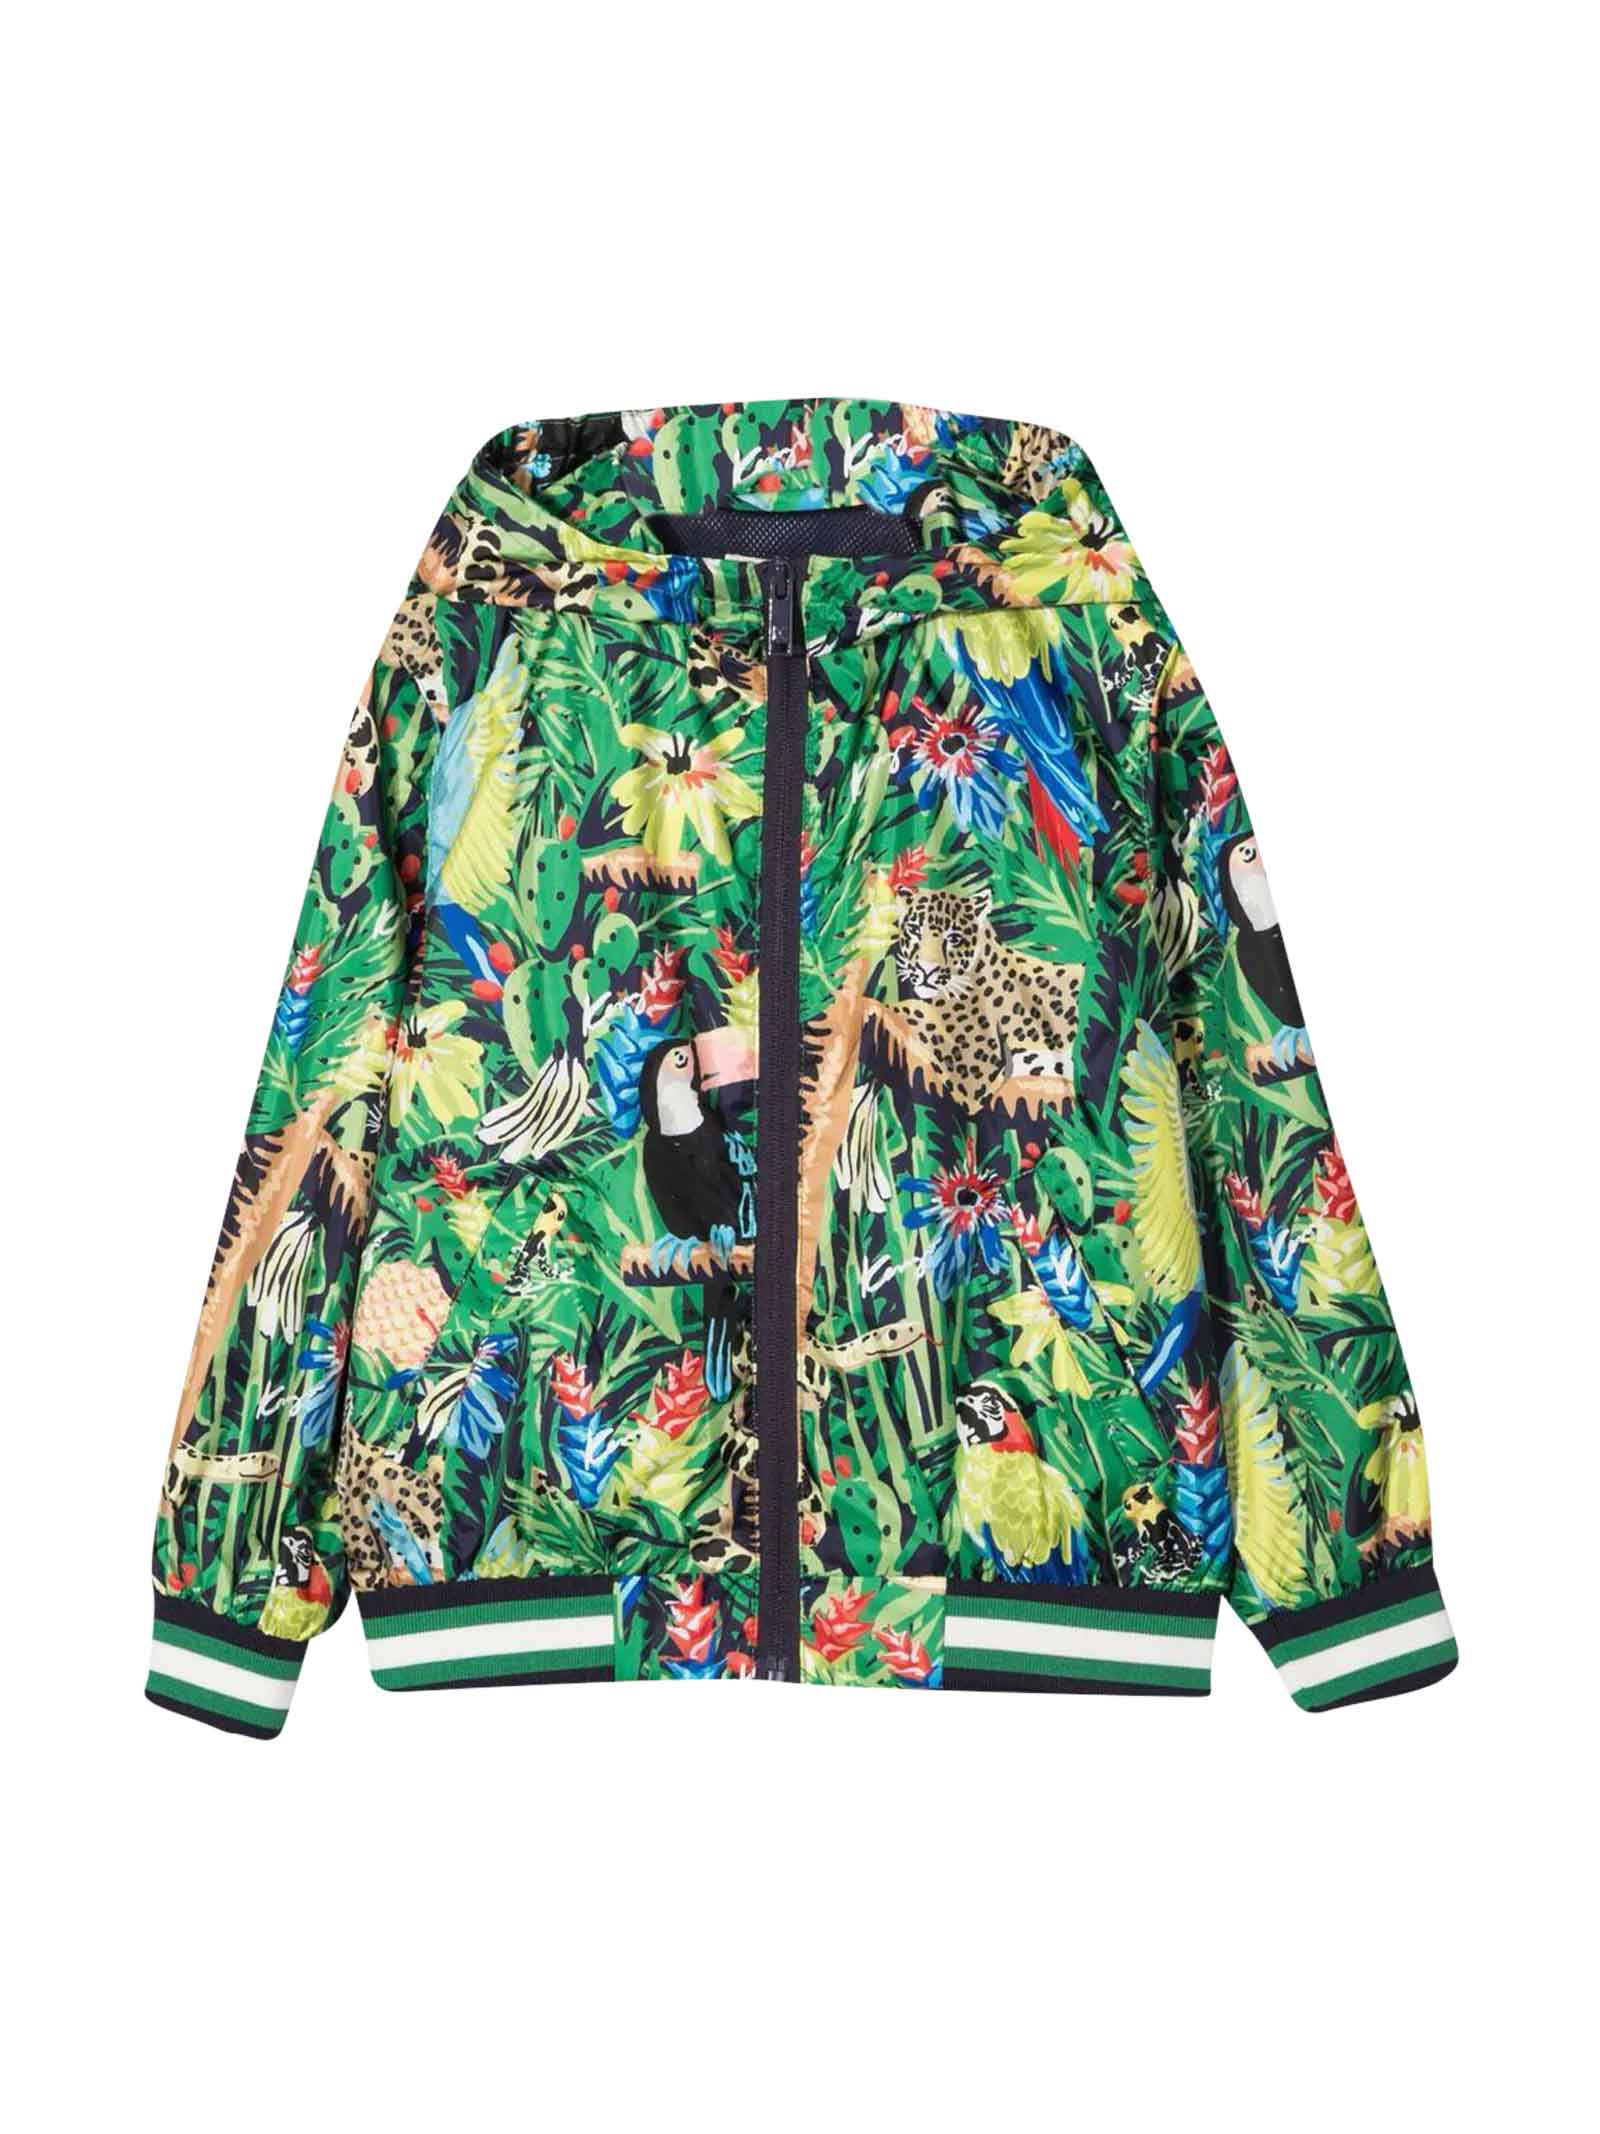 KENZO UNISEX MULTICOLOR WINDPROOF JACKET WITH ALL-OVER BOTANICAL PRINT WITH STRIPED EDGES, CLASSIC HOOD, F